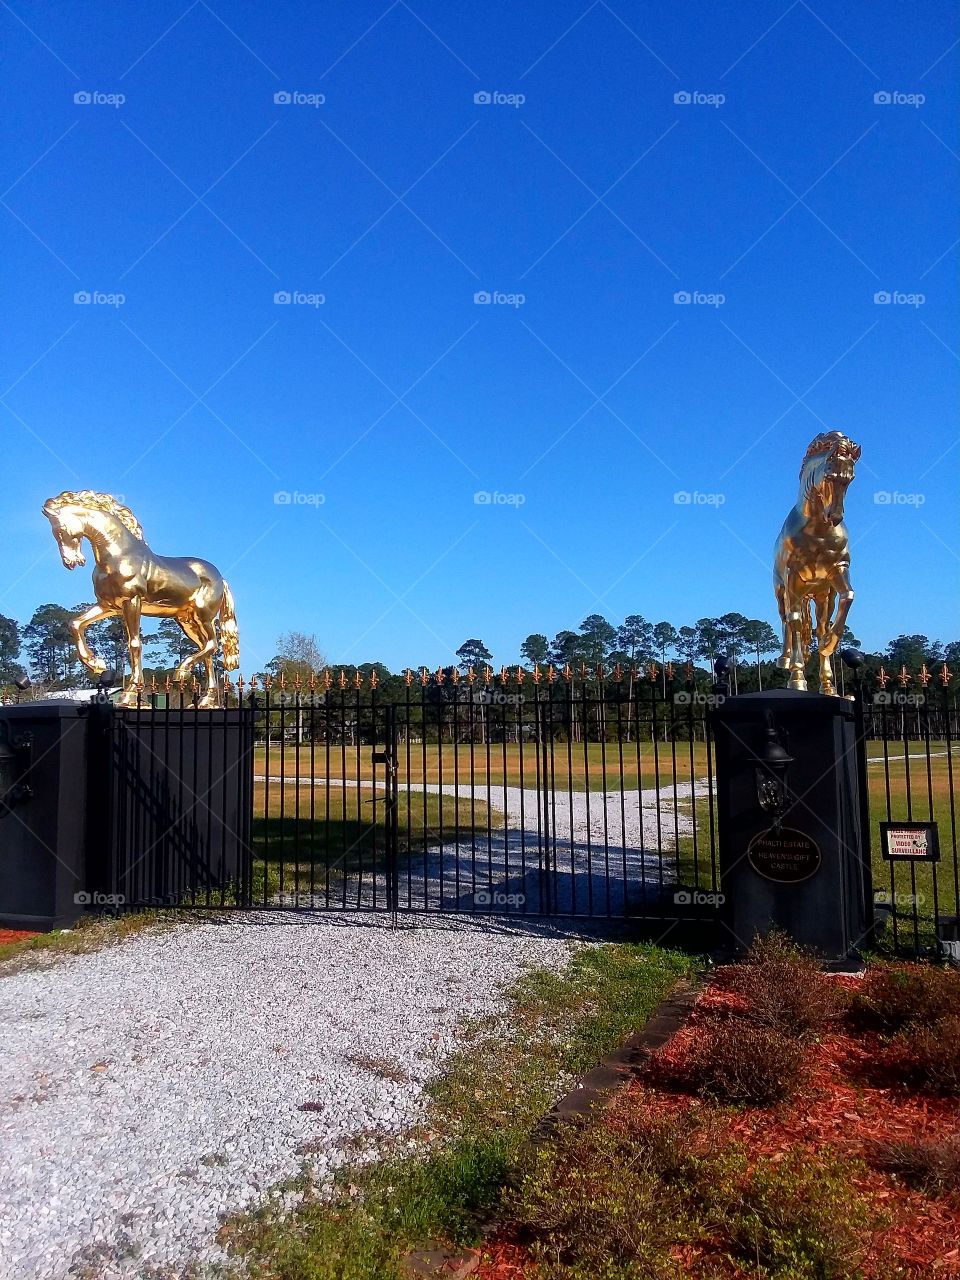 the golden horse Freeport area county town Florida road